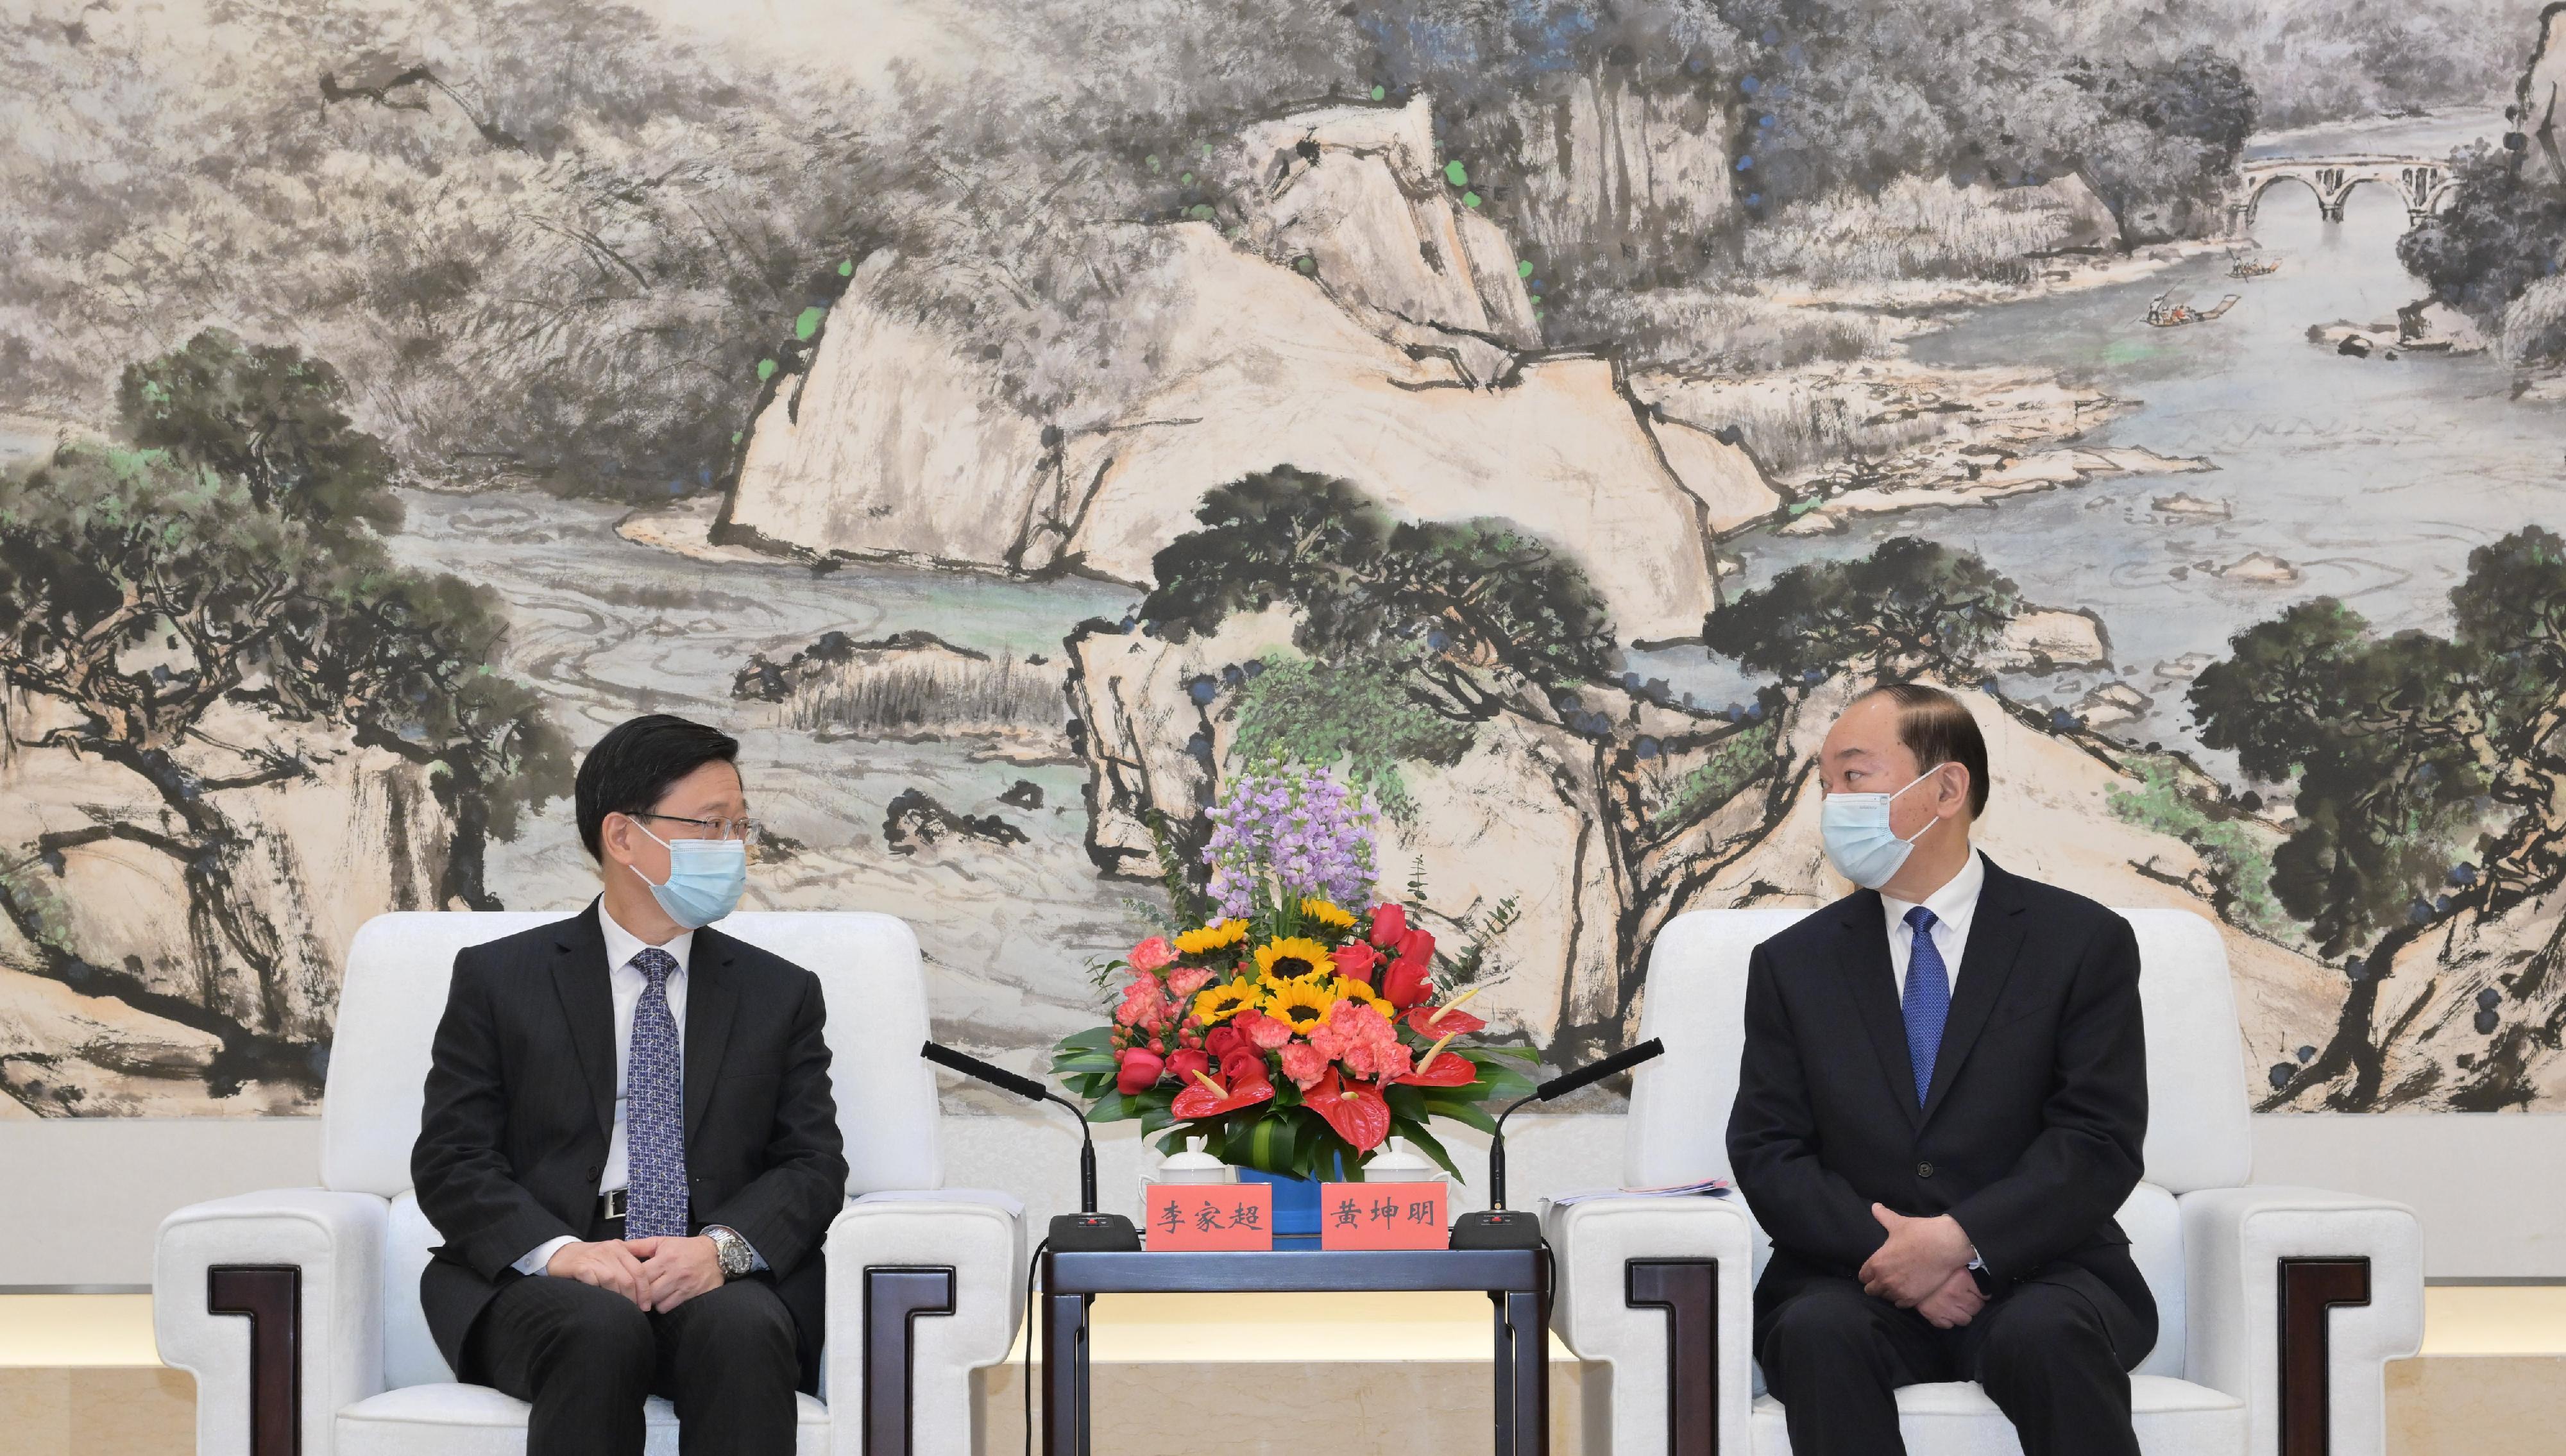 The Chief Executive, Mr John Lee, led a delegation to visit Guangzhou and Shenzhen today (February 23). Photo shows Mr Lee (left) meeting the Secretary of the CPC Guangdong Provincial Committee, Mr Huang Kunming (right) in Guangzhou.